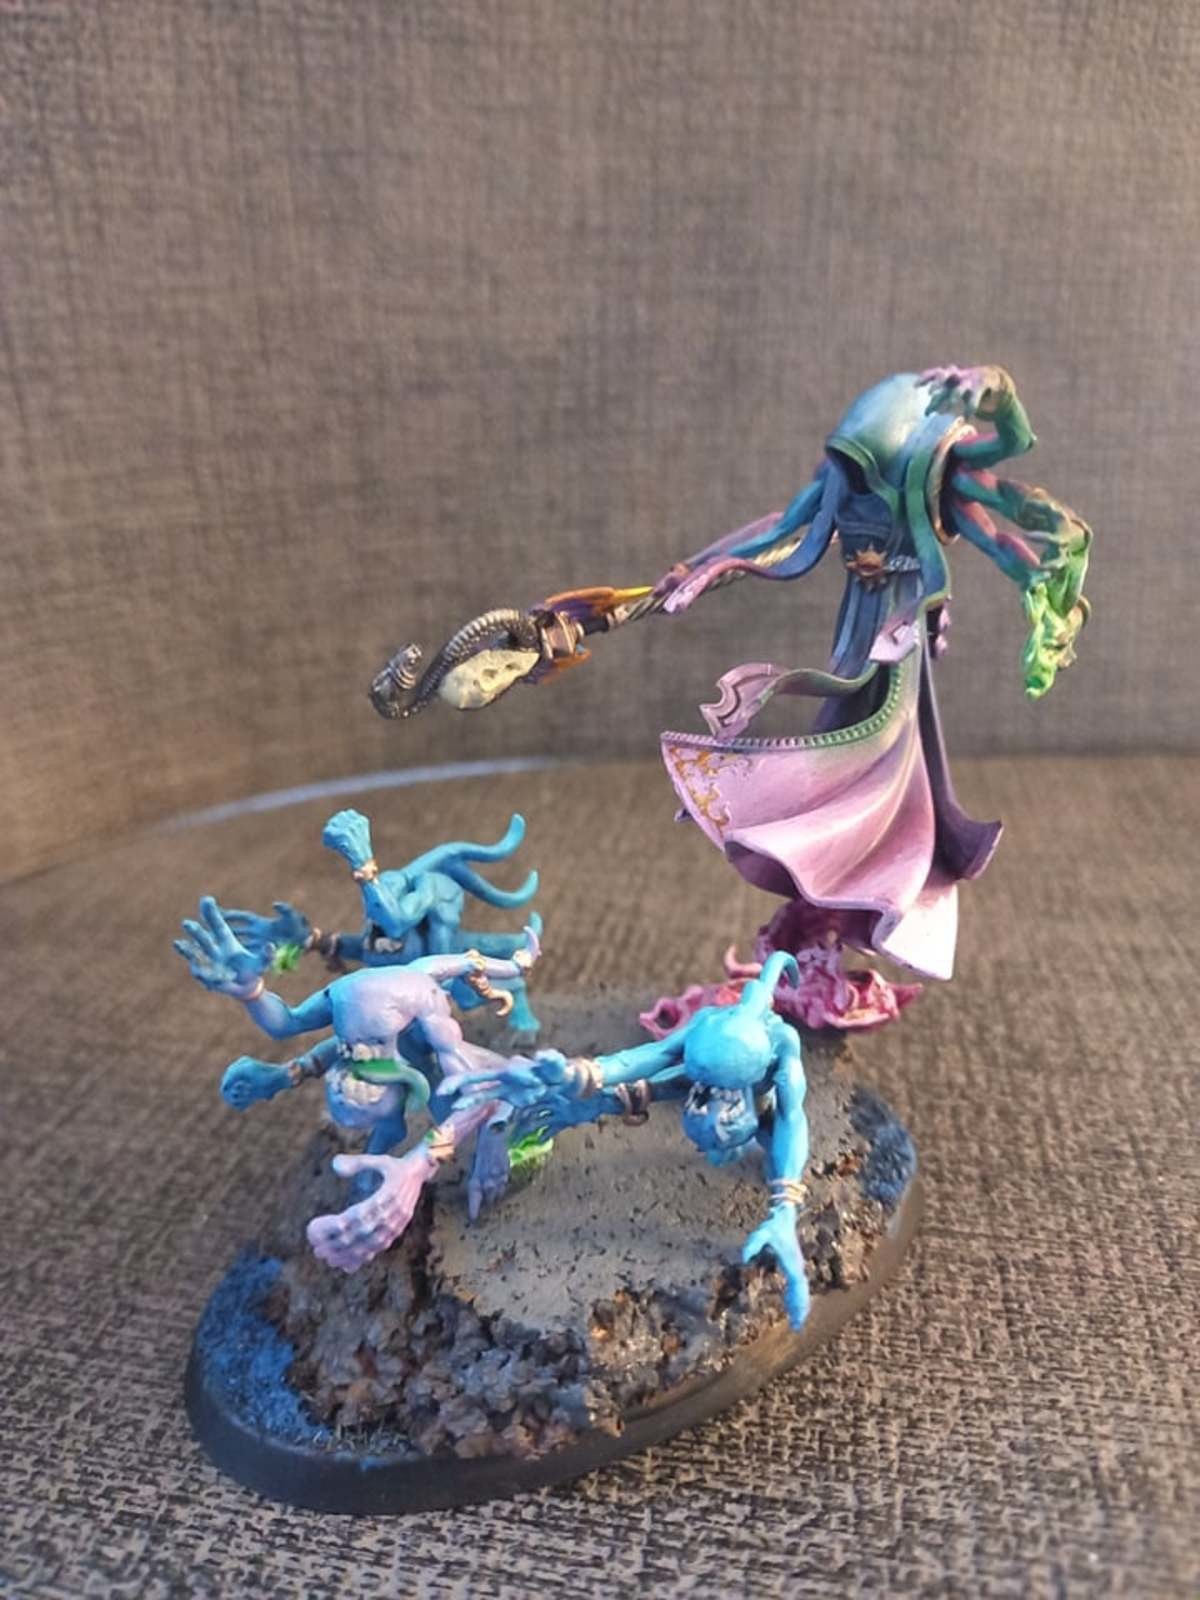 Finished up my changling boy. Thought adding in the blue horrors from the burning chariot made a nice touch join list: Models (16 subs)Mention History.. It really made a nice touch